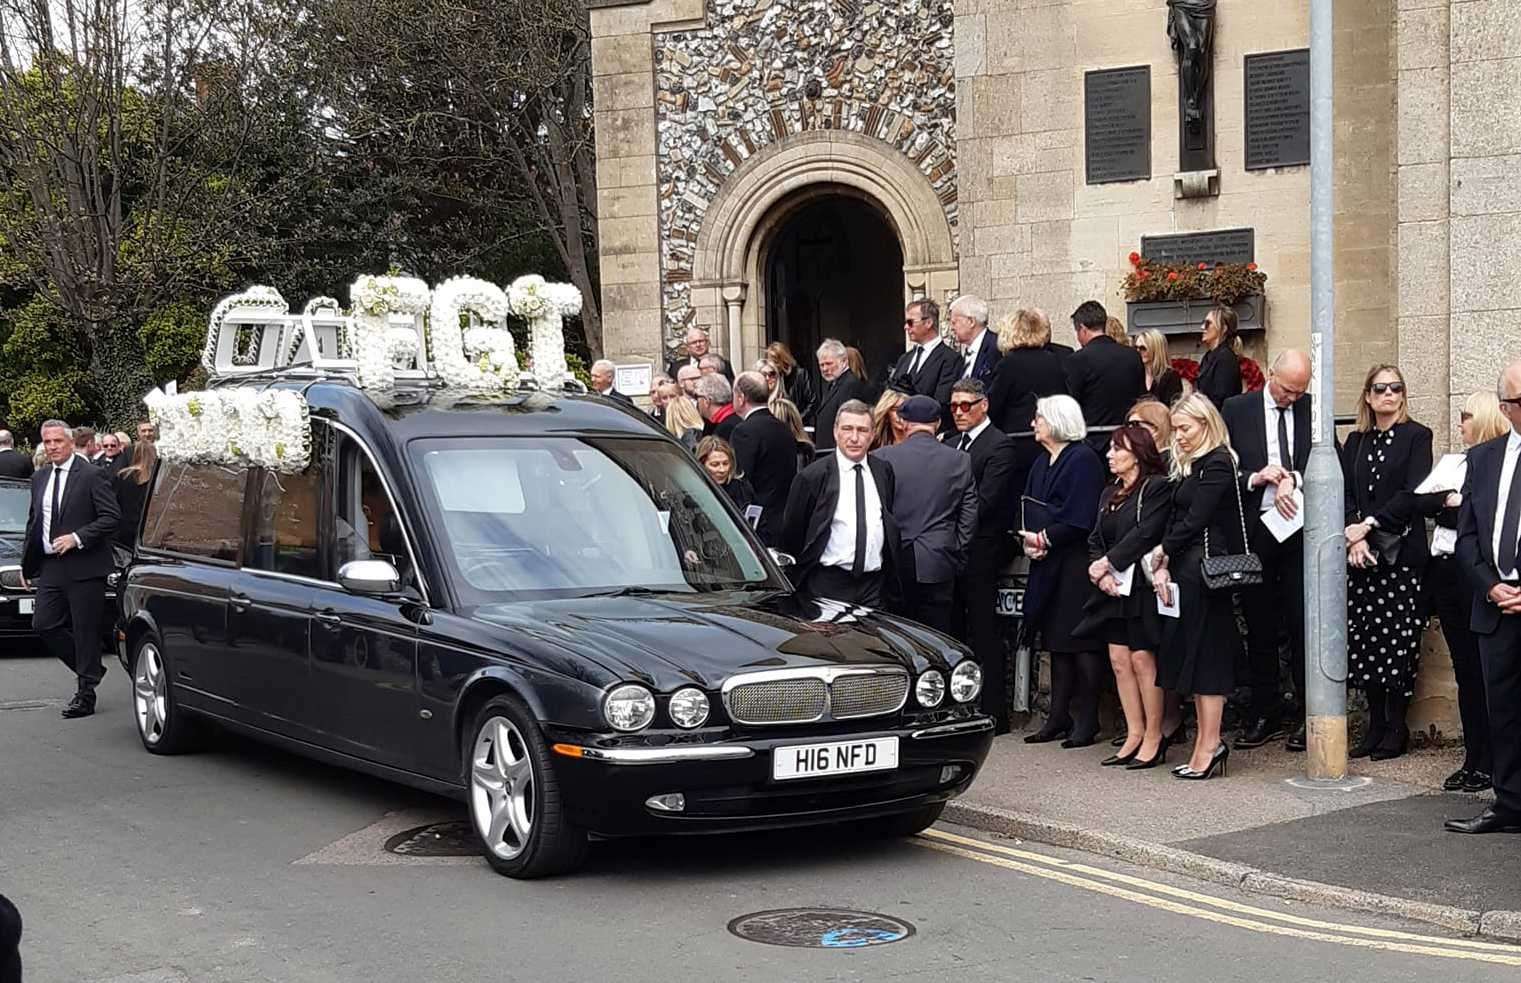 About 1,000 mourners lined the streets of Thanet to pay their respects to Frank Thorley. Picture: Aram Rawf